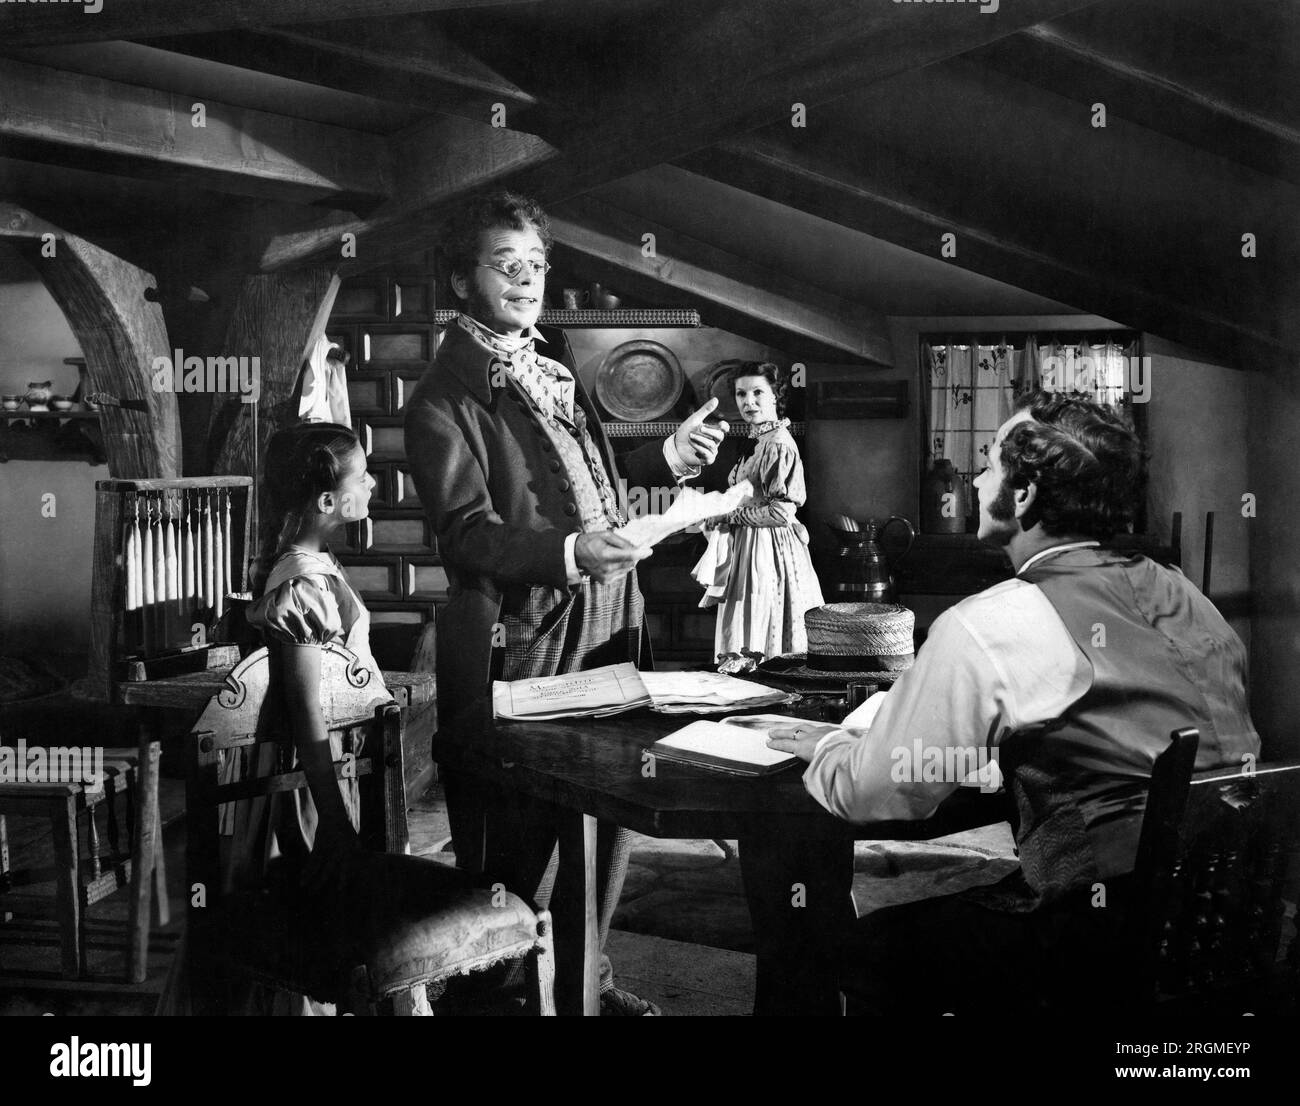 Paul Muni (Stand), am Drehort des Films, „A Song to Remember“, Columbia Pictures, 1945 Stockfoto